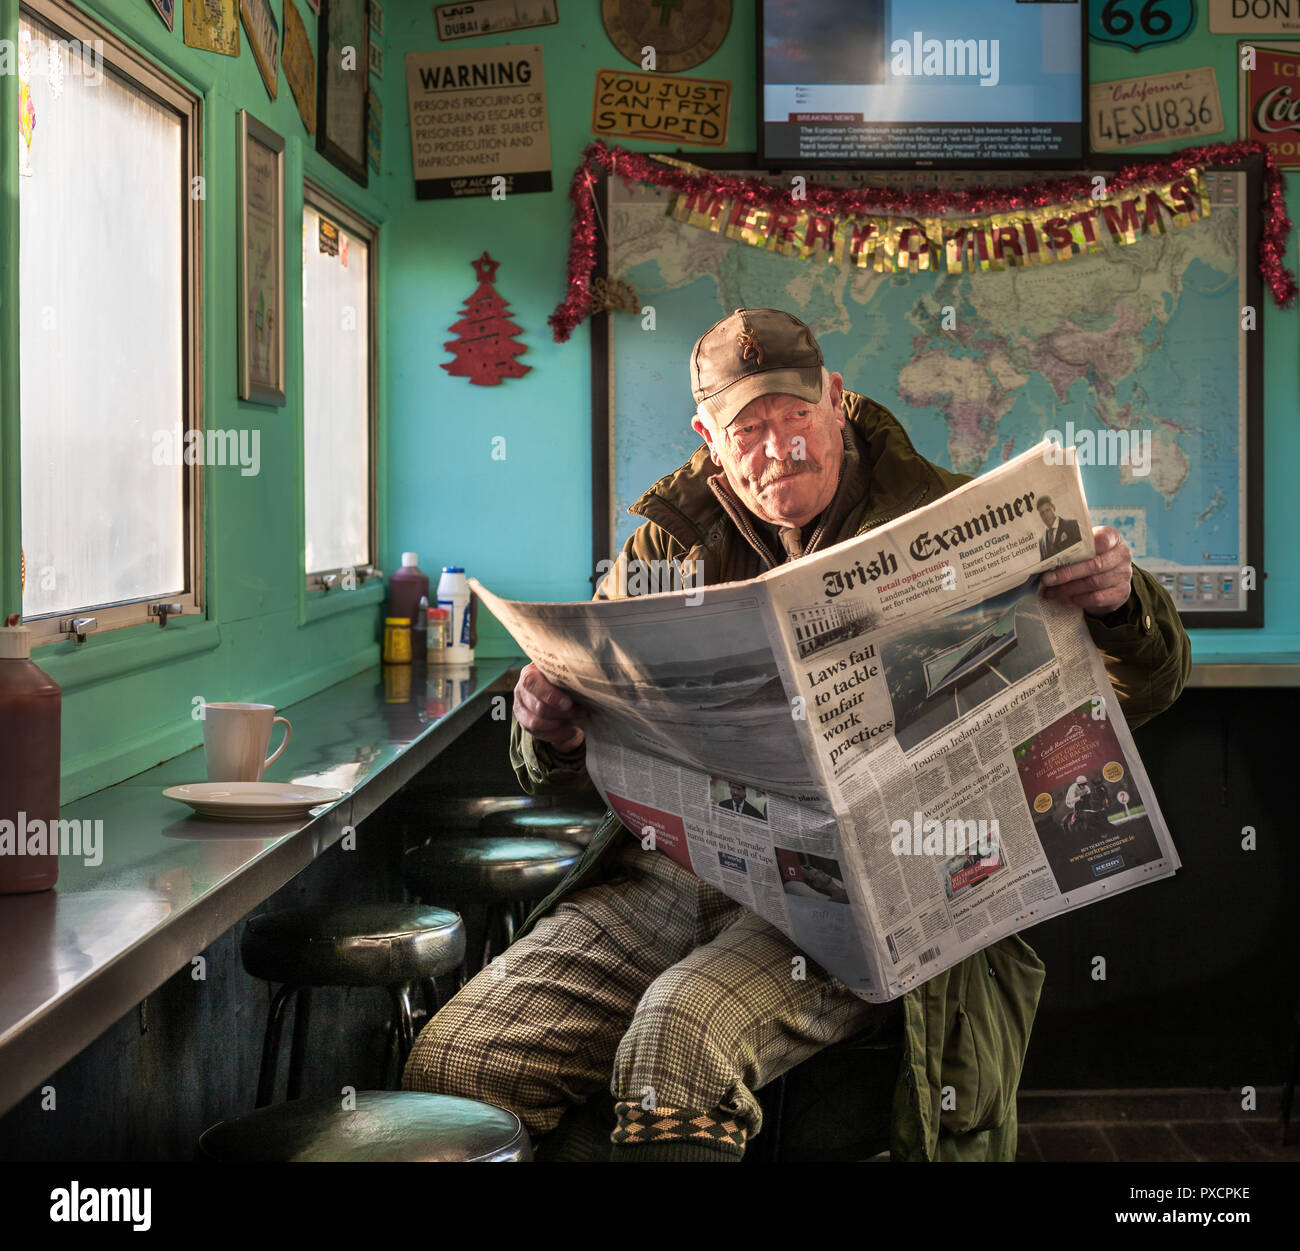 Co. Waterford, Ireland. 08th December, 2017. Tony Keane of Dungarvan reads the morning paper over breakfast at J.J.'s Diner before he goes out for a d Stock Photo